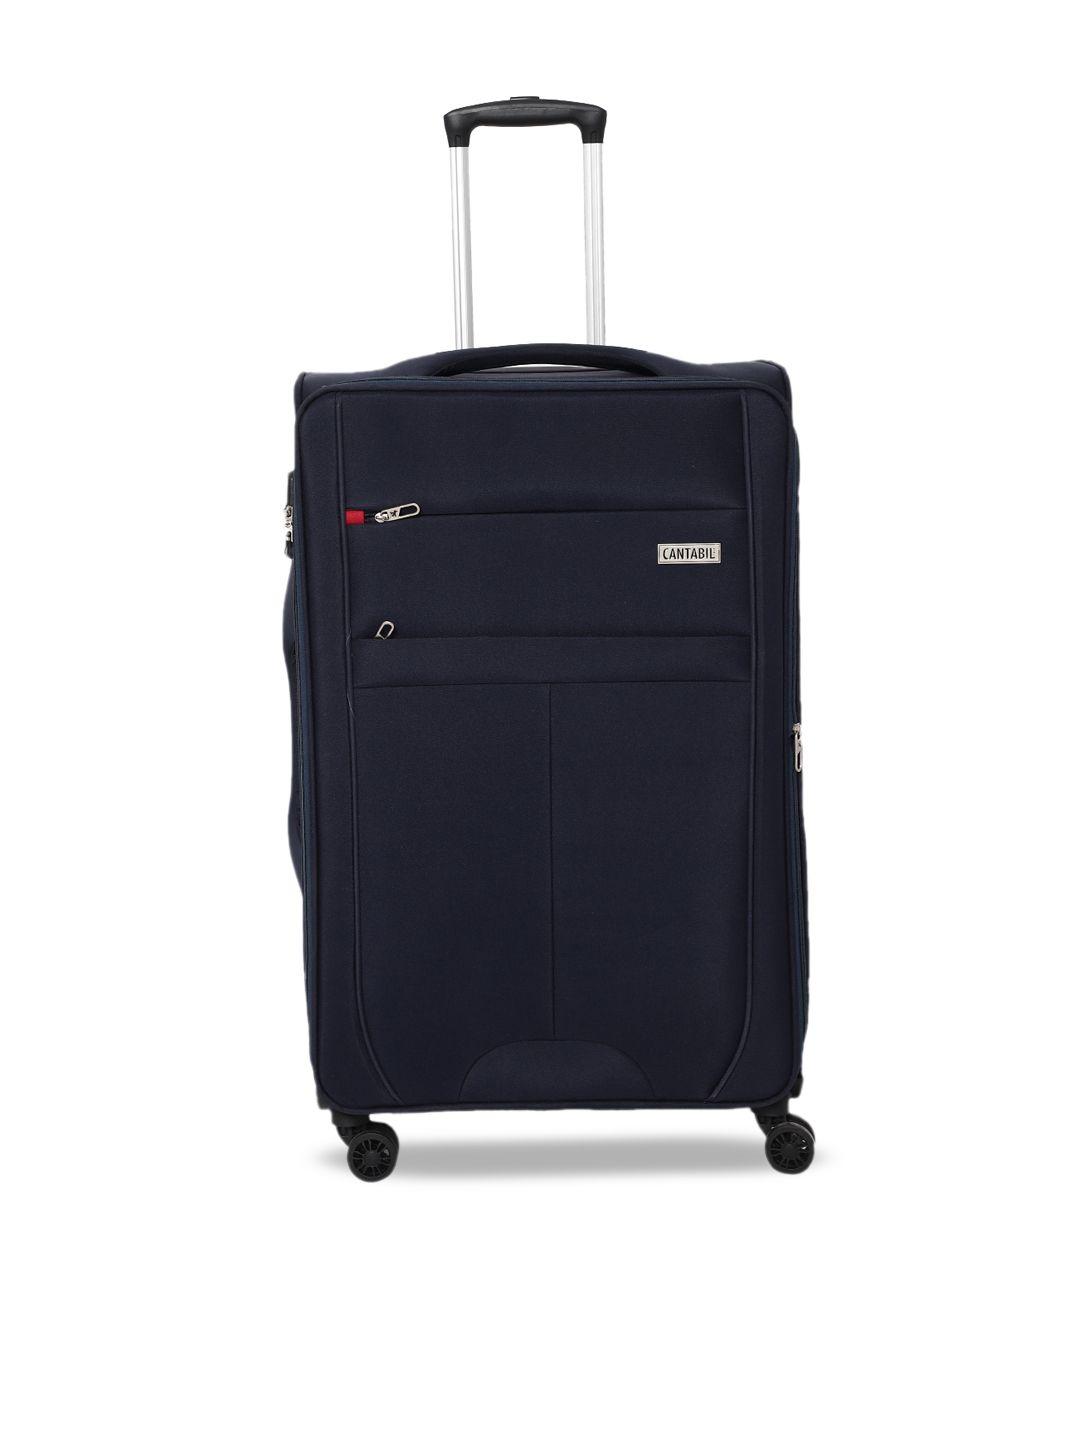 cantabil soft-sided large trolley suitcase